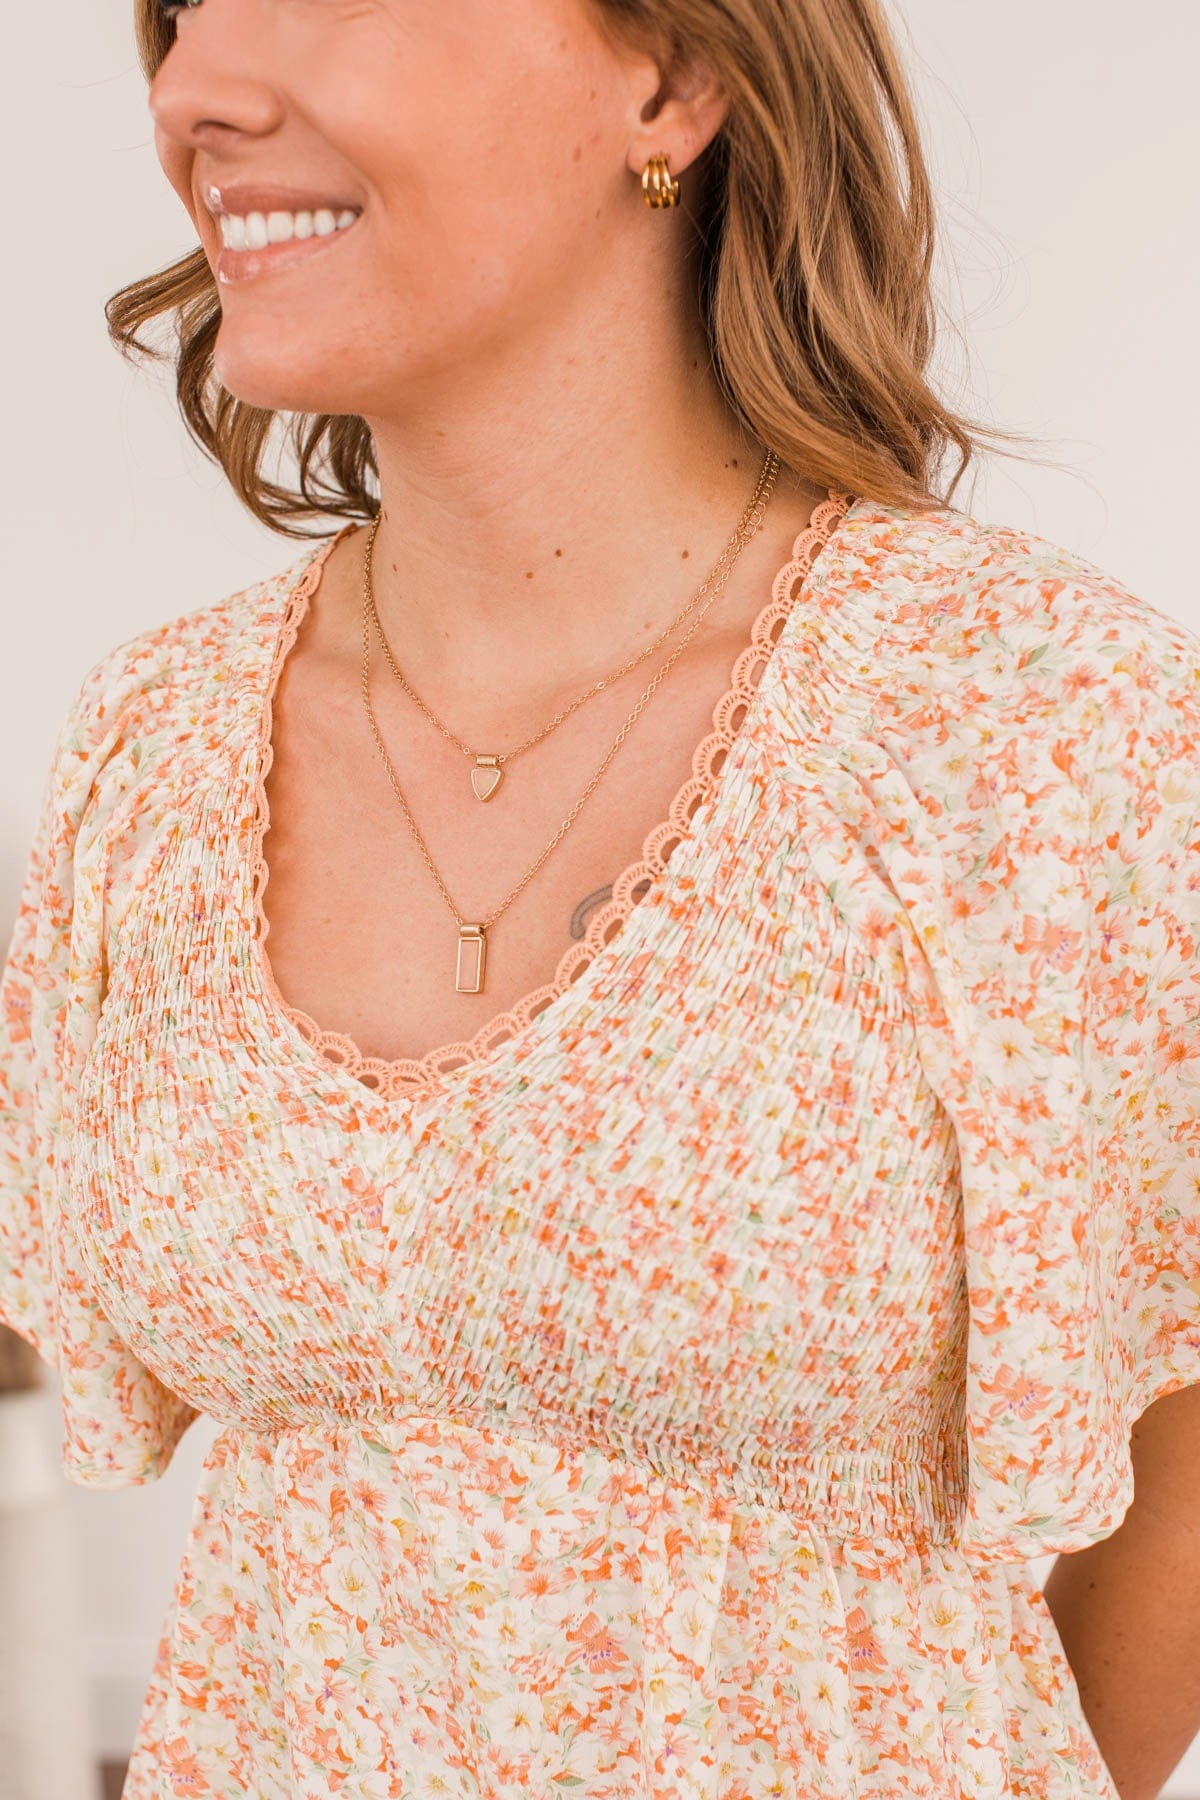 Unmistakable Grace 2 Tiered Necklace- Pink Marble & Gold